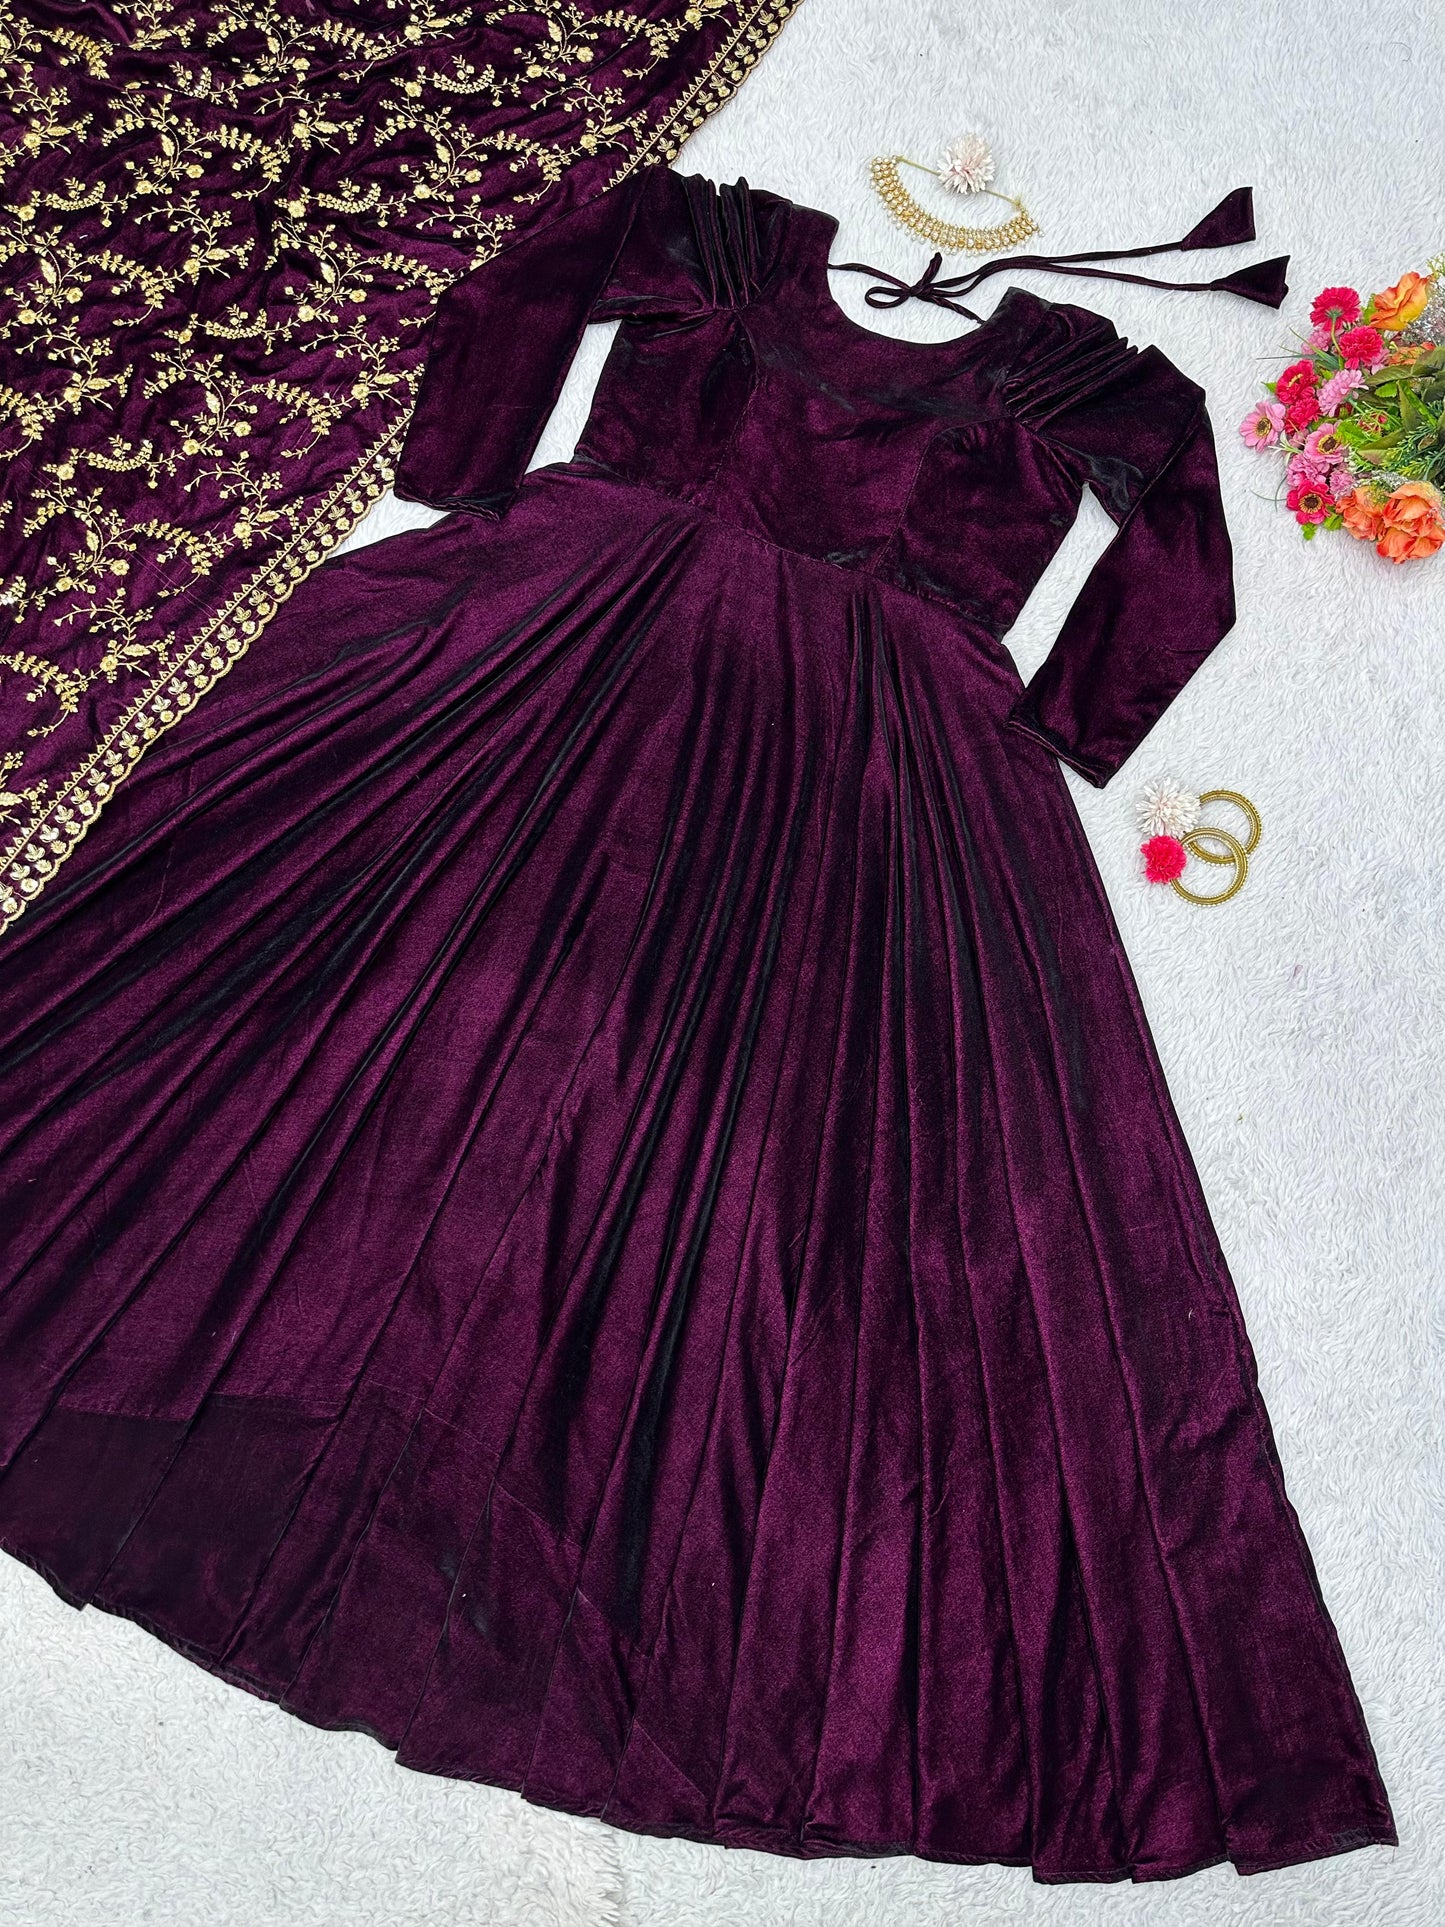 Designer Wine Anarkali Gown With Dupatta, Long Gown with dupatta, Sequins Embroidered Gown, Gown for women, wedding gown, Bollywood Gown